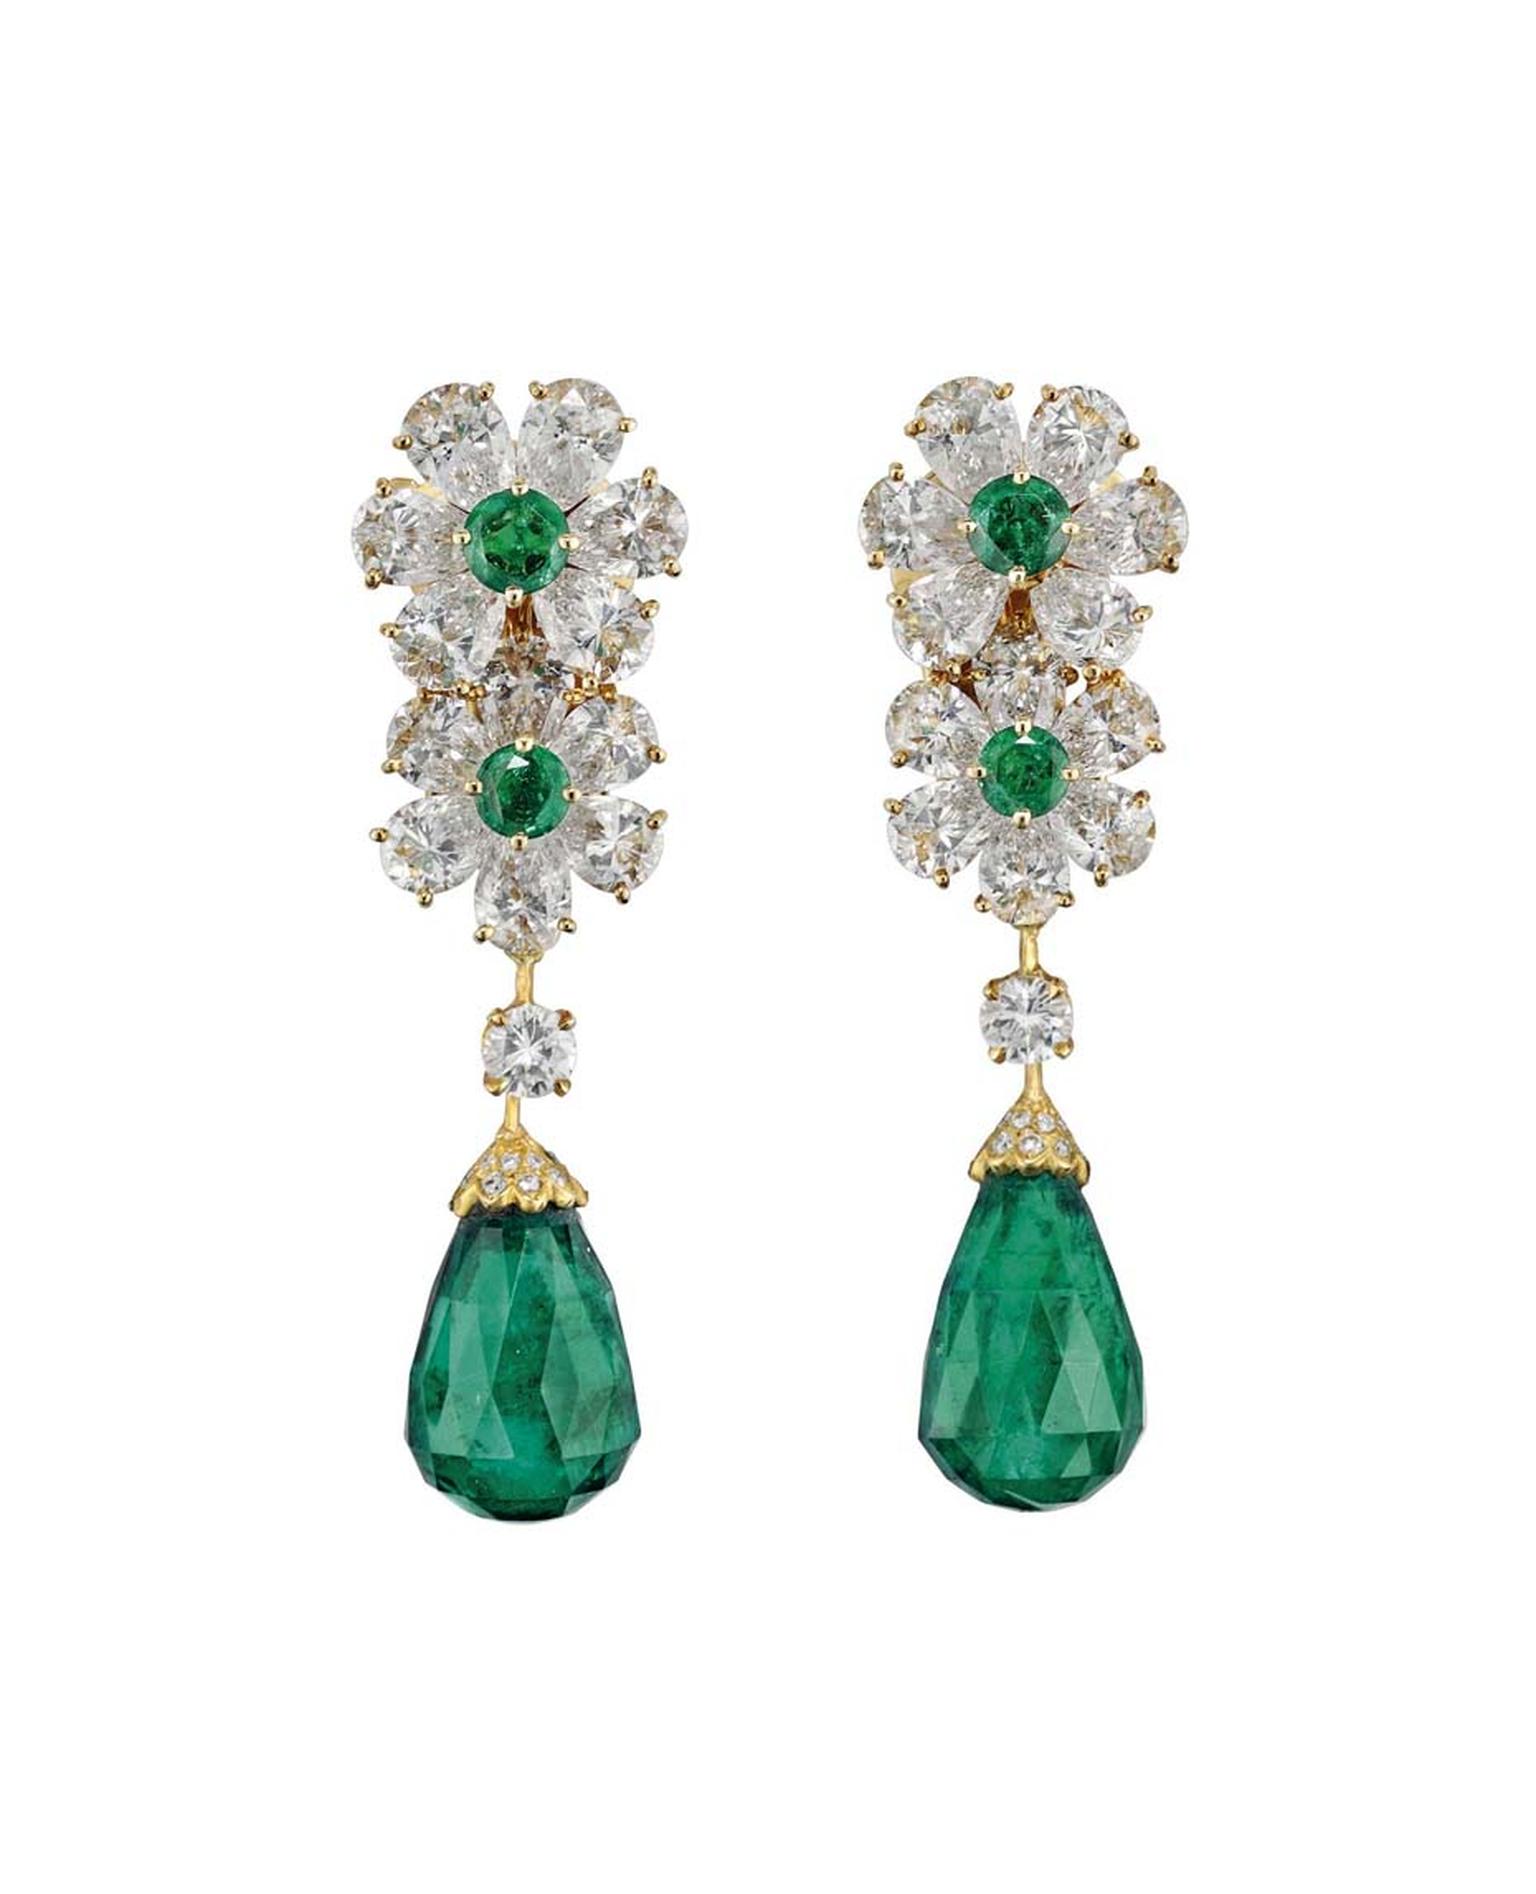 A pair of 1990s Van Cleef & Arpels emerald drop and diamond ear pendants are another highlight of Christie’s Important Jewels sale in London on 26 November 2014 (estimate: £60,000-£80,000).